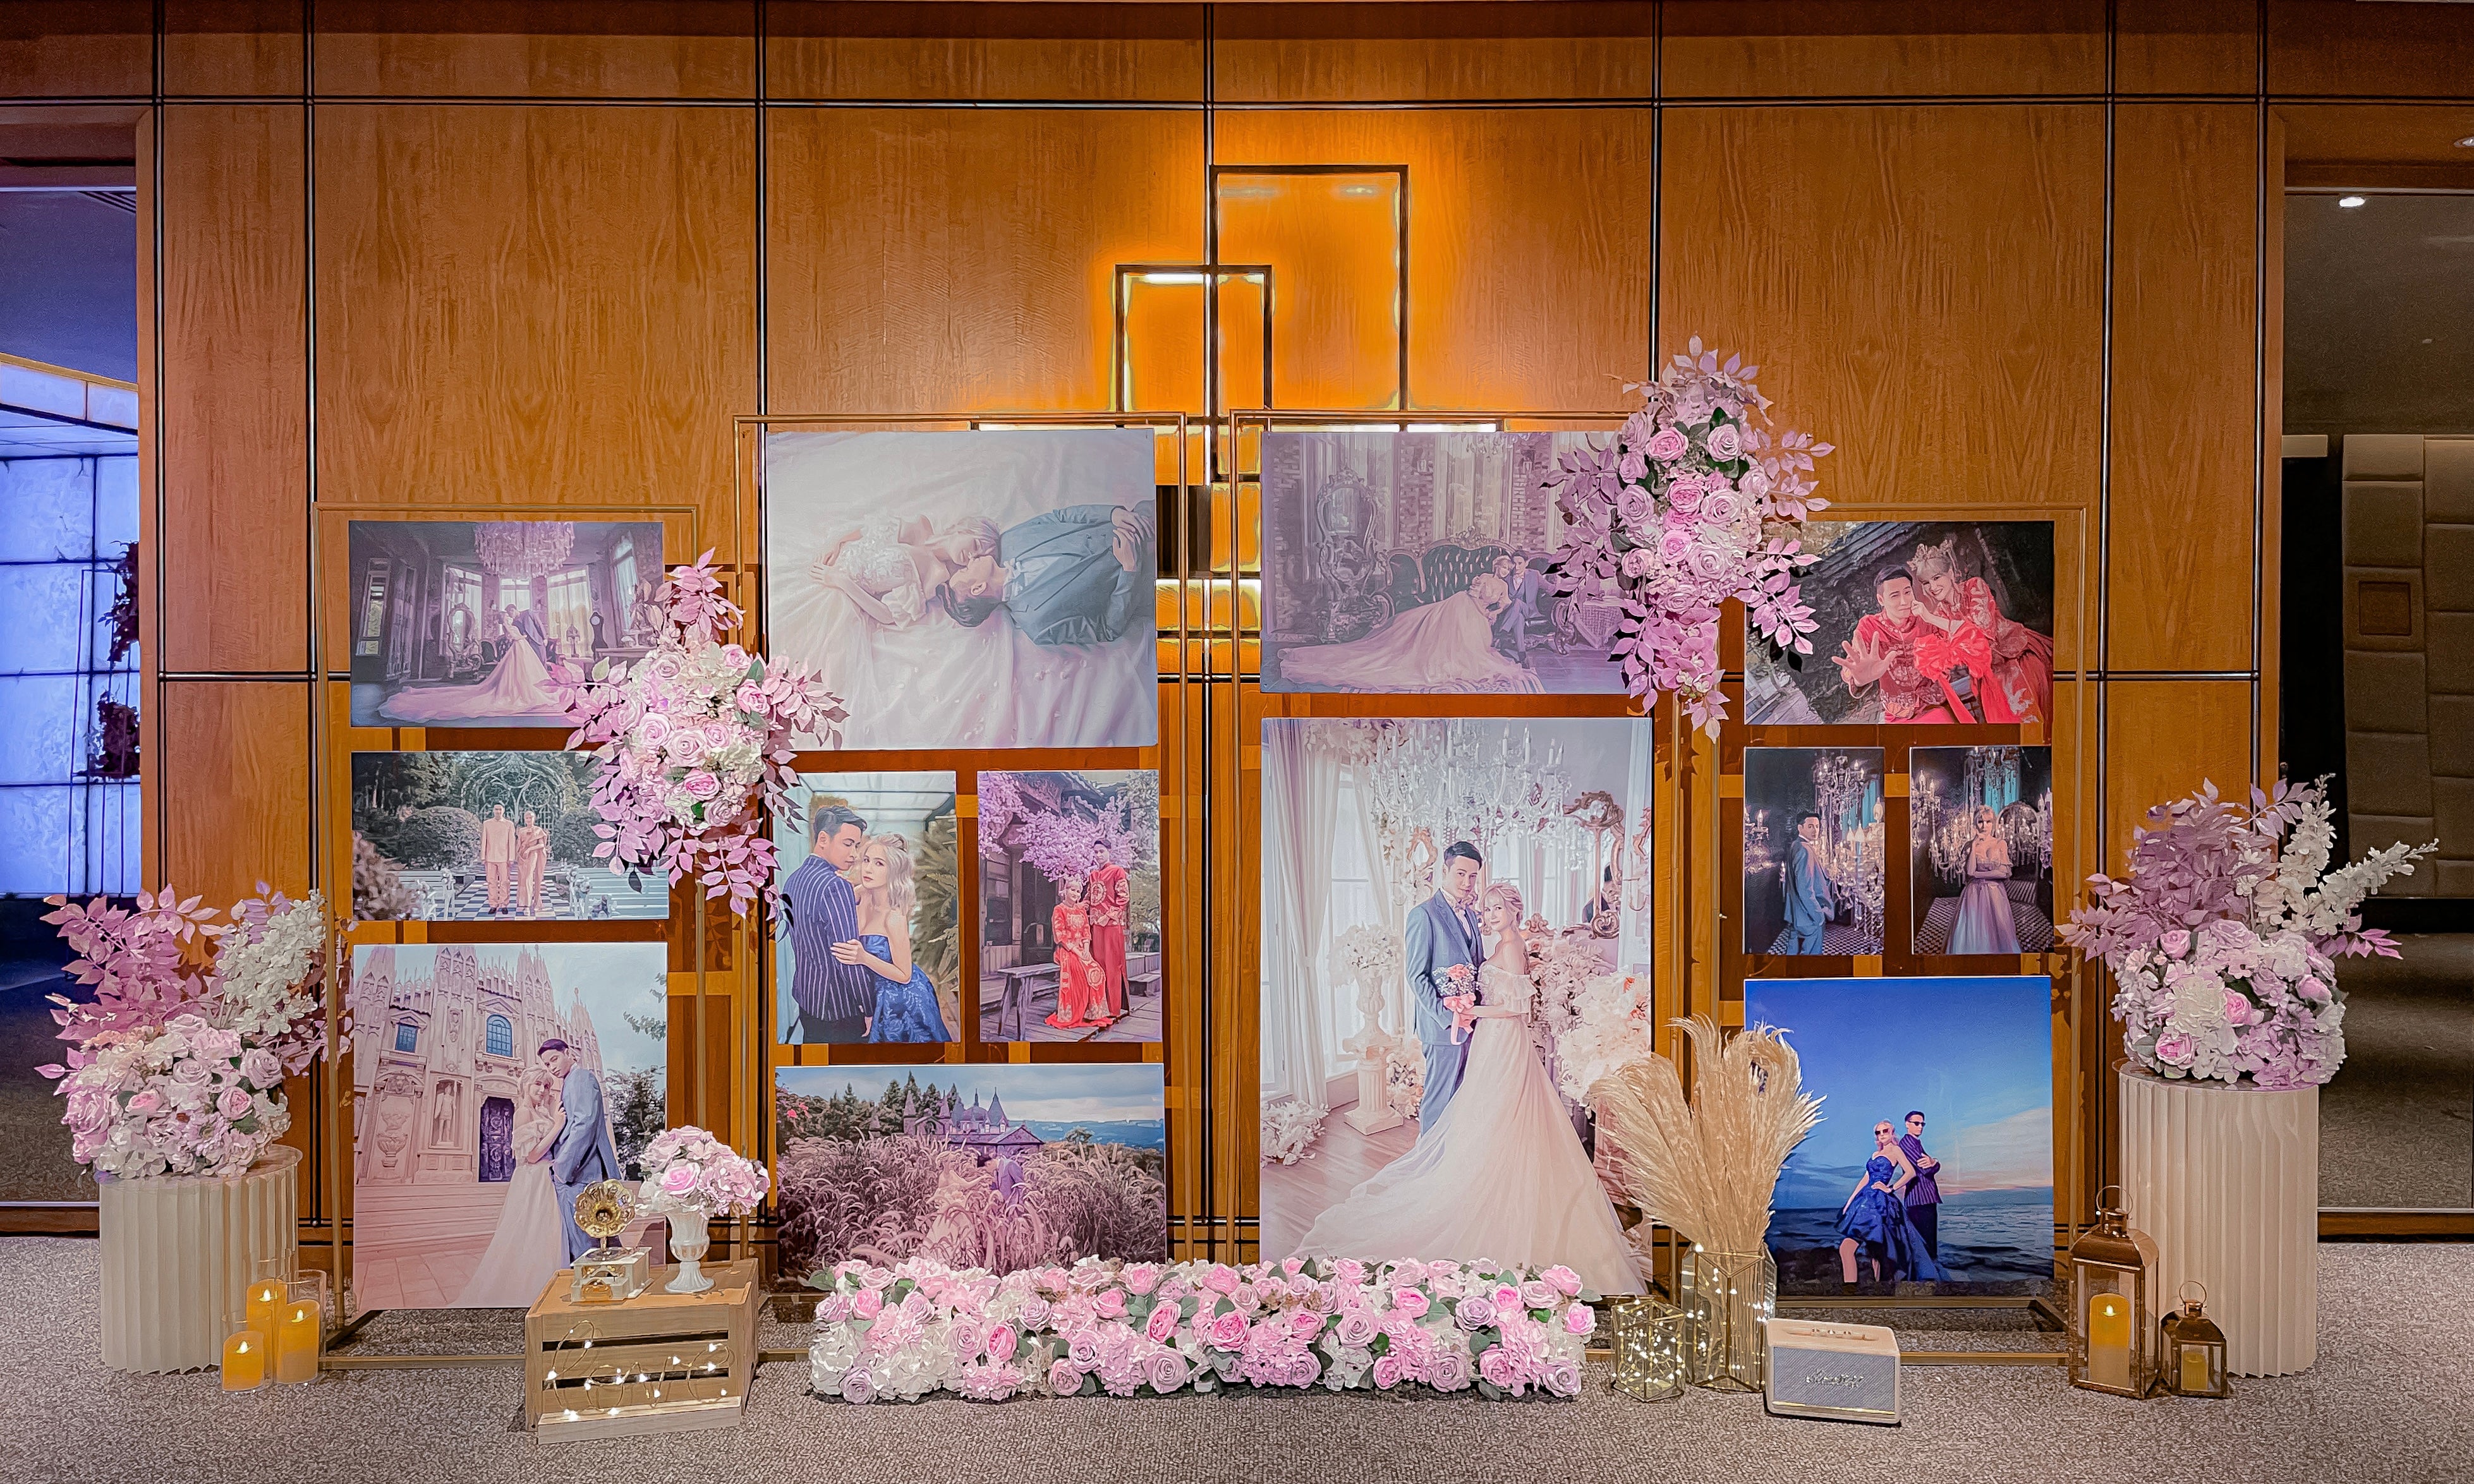 Wedding Reception Decor in Singapore - Multi-stands Photo Gallery with Purple/Lilac & White Florals (Venue: Marriott Tang Plaza Hotel Grand Ballroom)